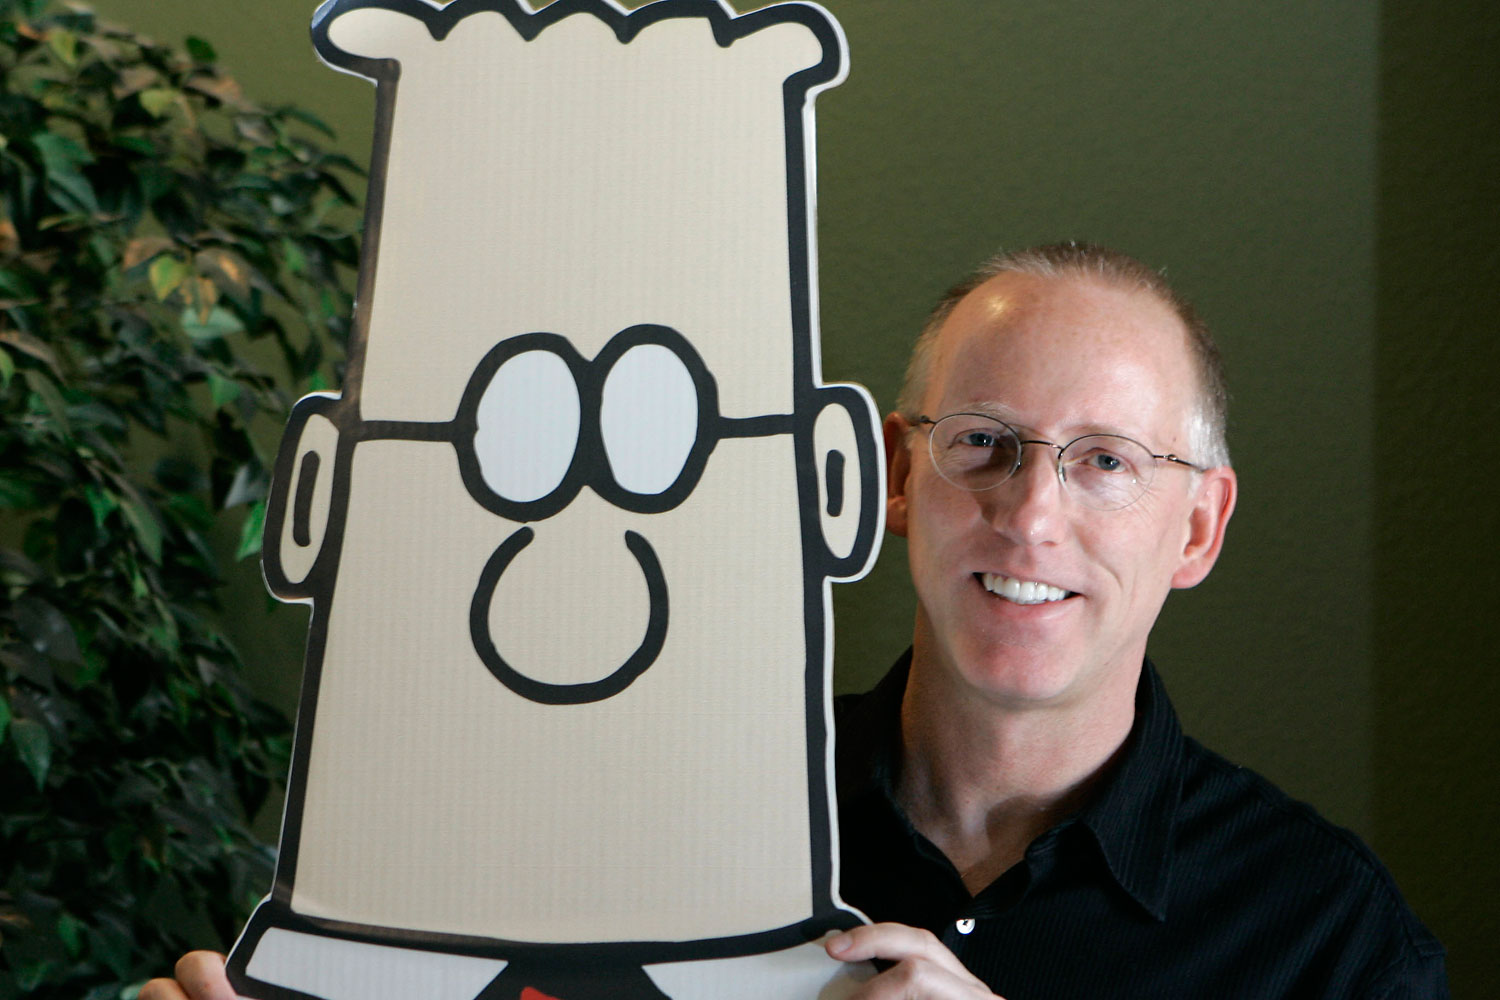 Scott Adams, creator of the comic strip Dilbert, poses for a portrait with the Dilbert character in his studio in Dublin, Calif., Thursday, Oct. 26, 2006. (Marcio Jose Sanchez—AP)